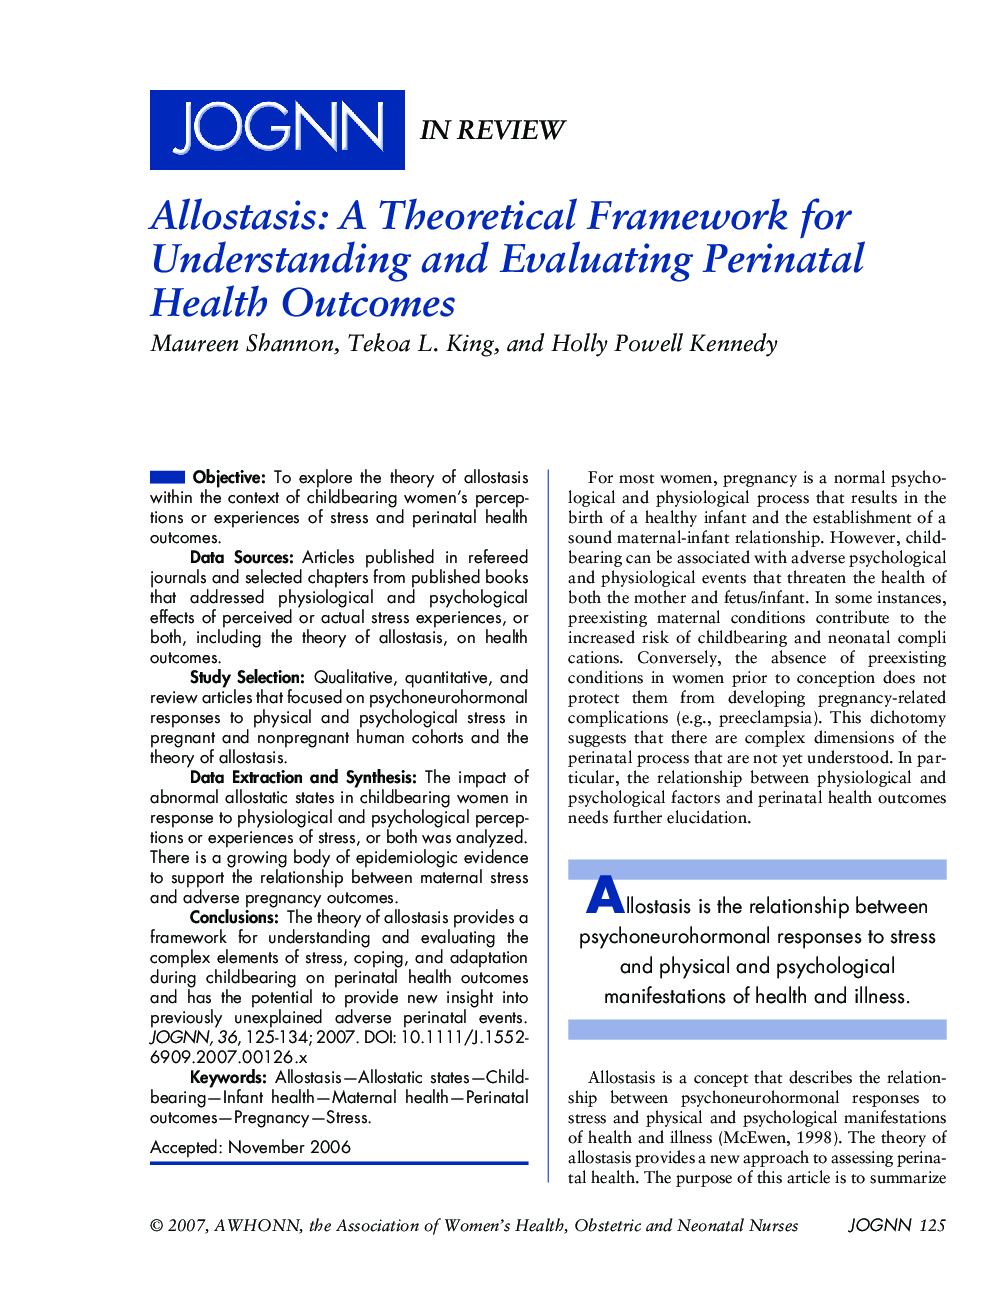 Allostasis: A Theoretical Framework for Understanding and Evaluating Perinatal Health Outcomes